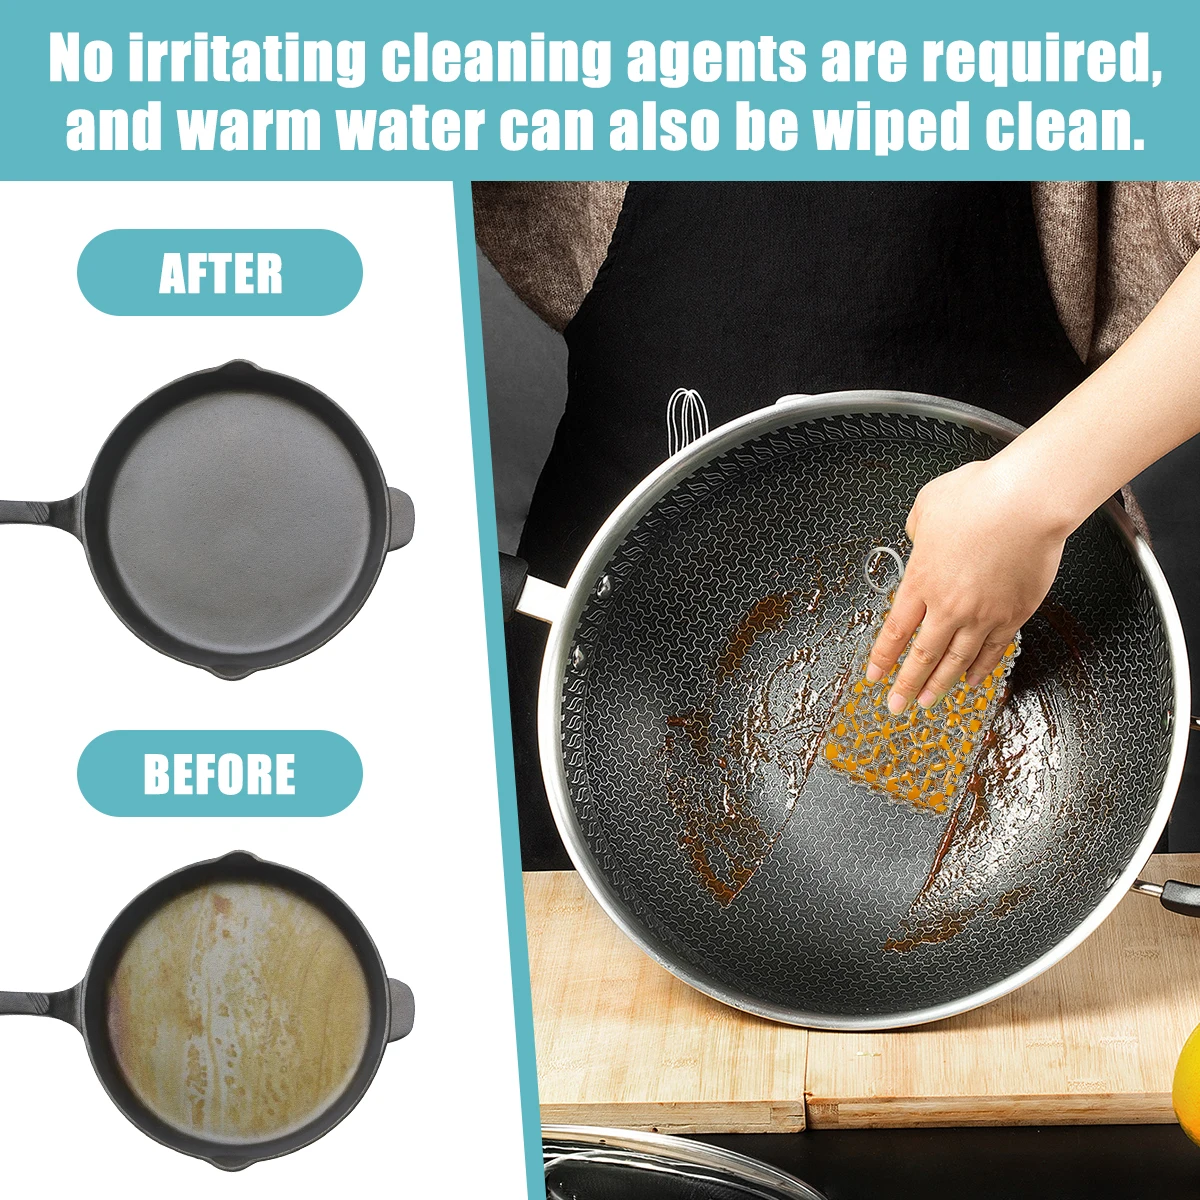 https://ae01.alicdn.com/kf/S7b95626ef6534def8dbd3c1d9e80b3b2E/Kitchen-Stainless-Steel-Cleaner-Chainmail-Scrubber-with-Insert-Silicone-Pad-Reusable-Washing-Net-Cleaning-Tool-for.jpg